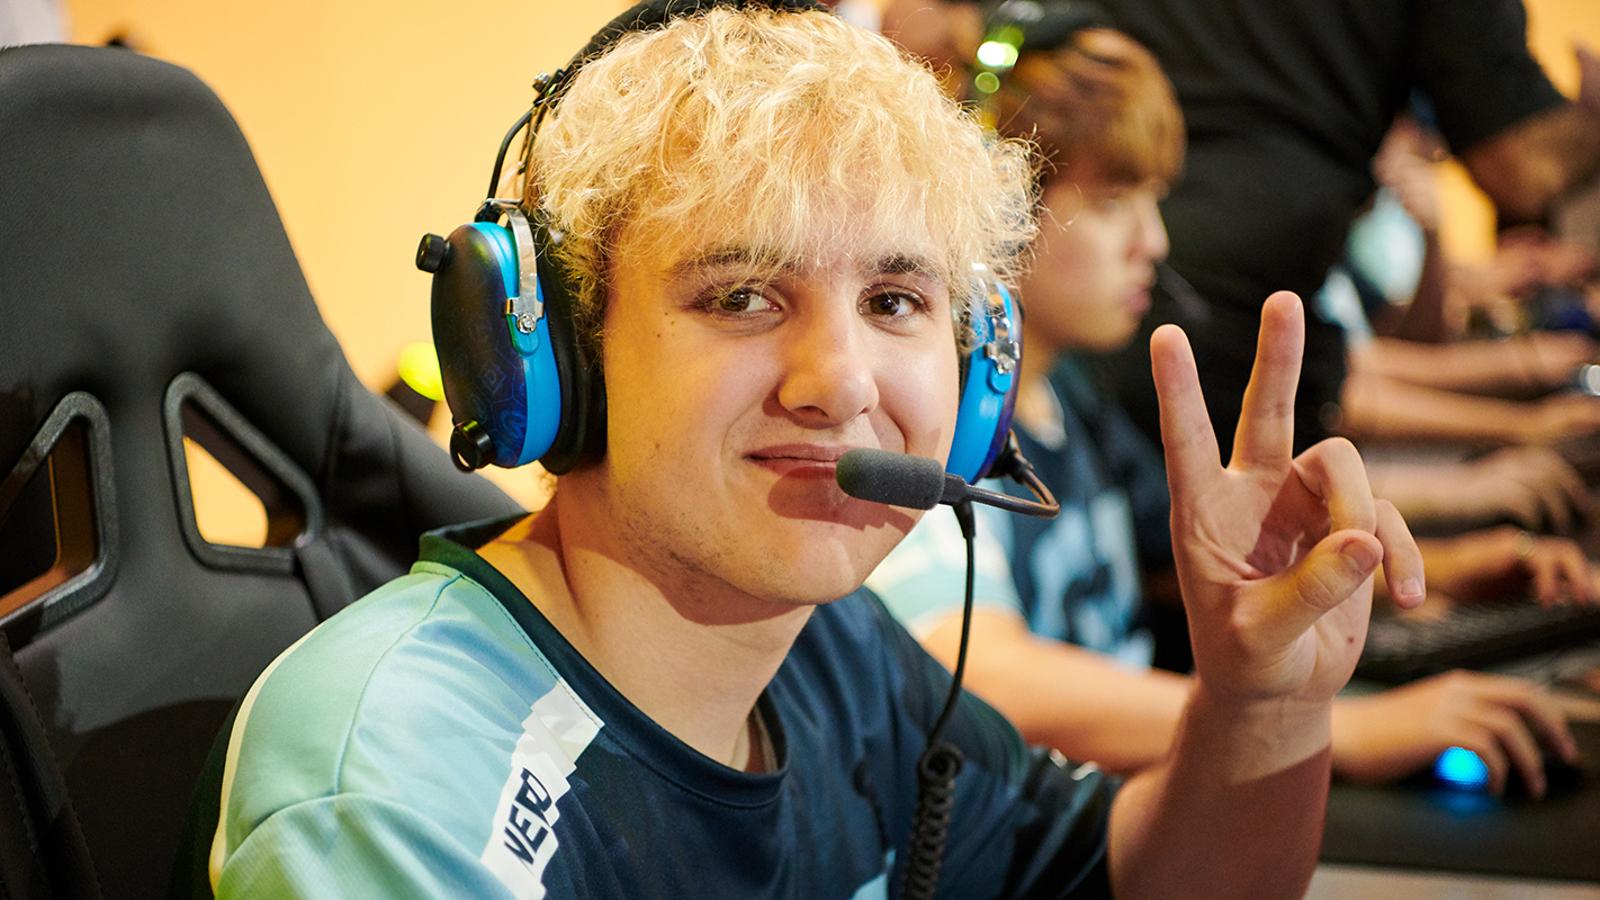 Nero competing in the Overwatch League was a familiar sight for fans.